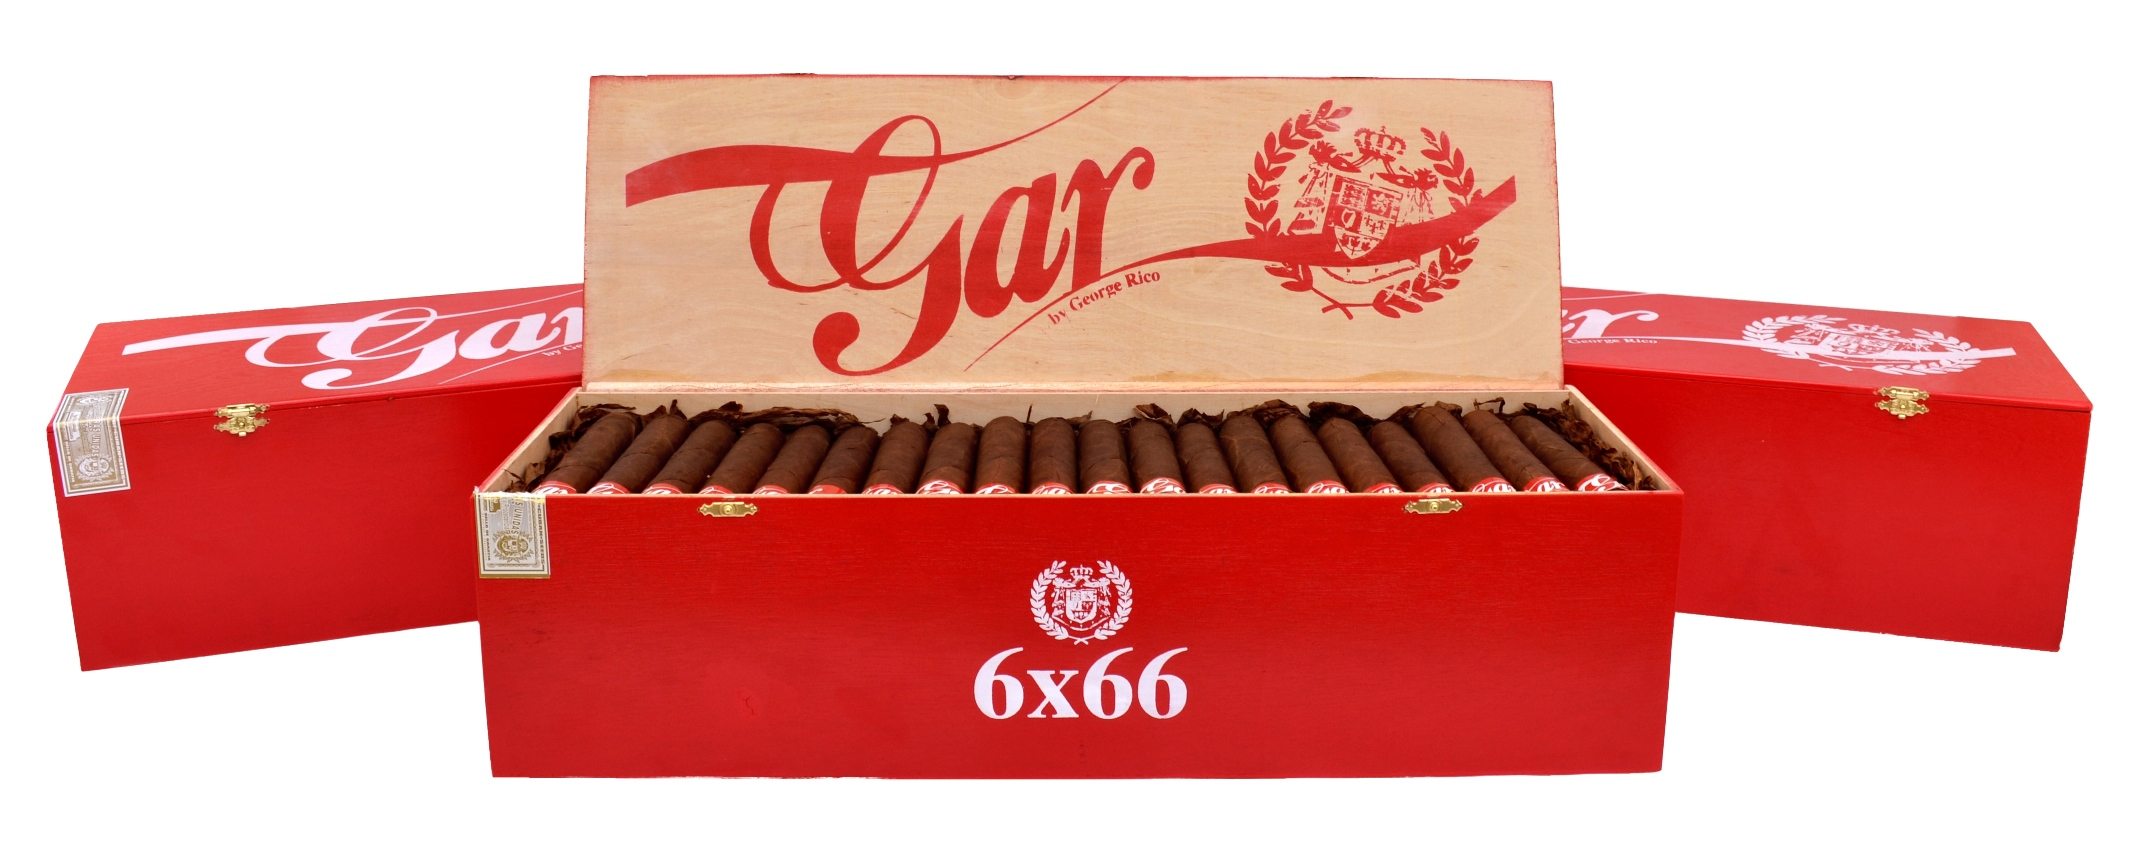 Cigar News: The new G.A.R. Red